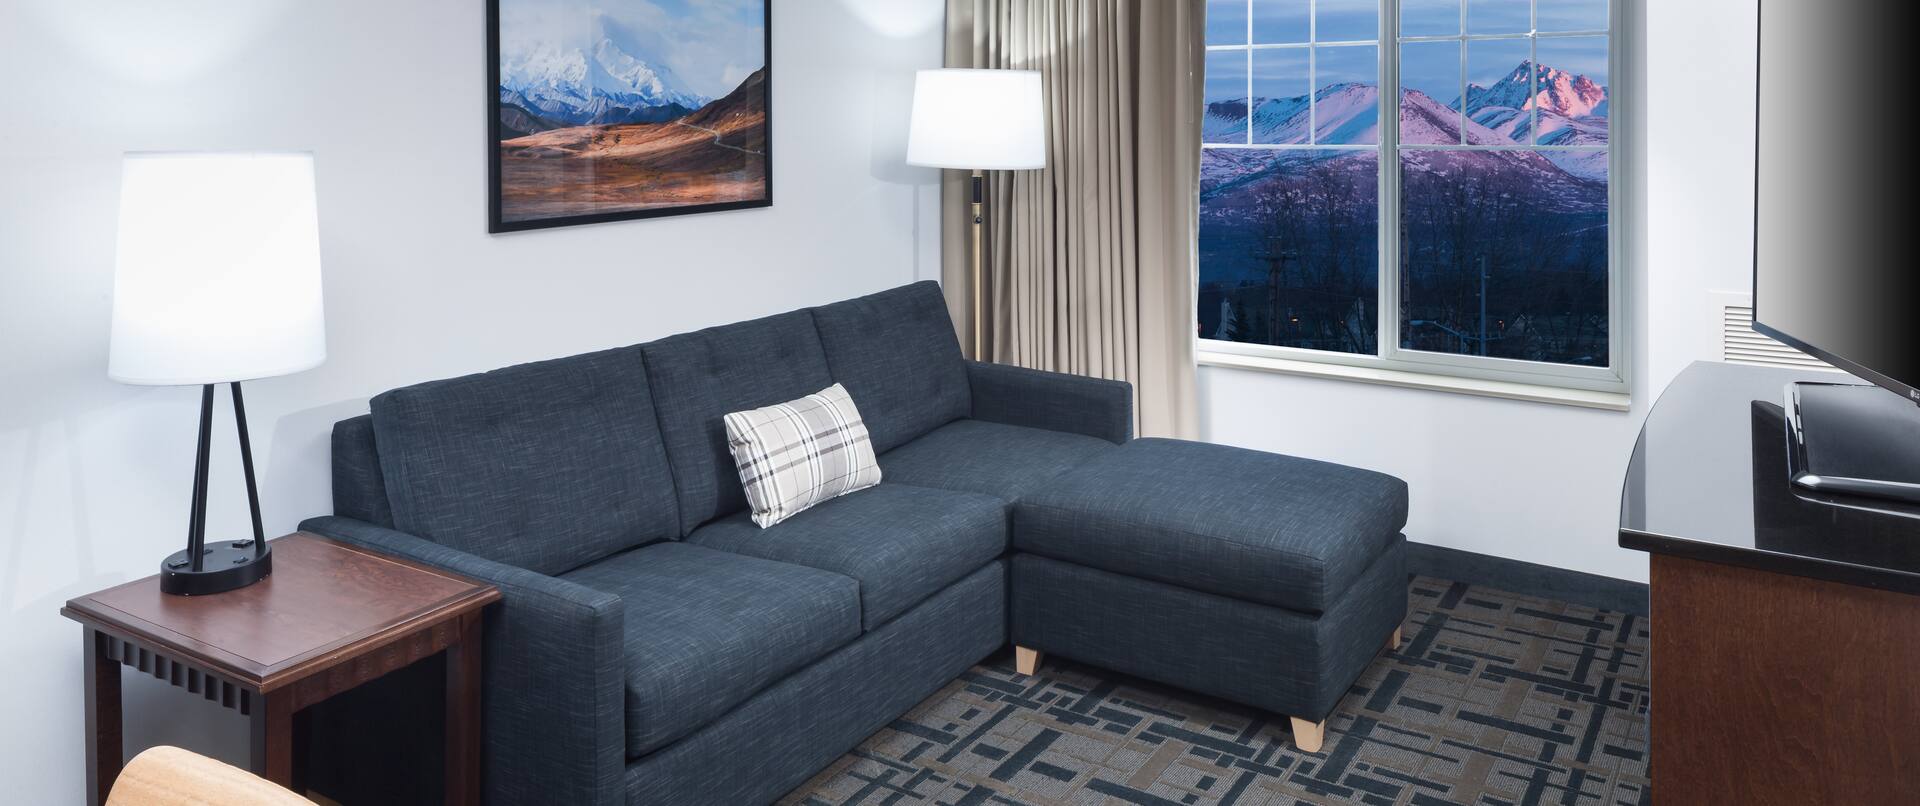 Sofa bed and mountain view